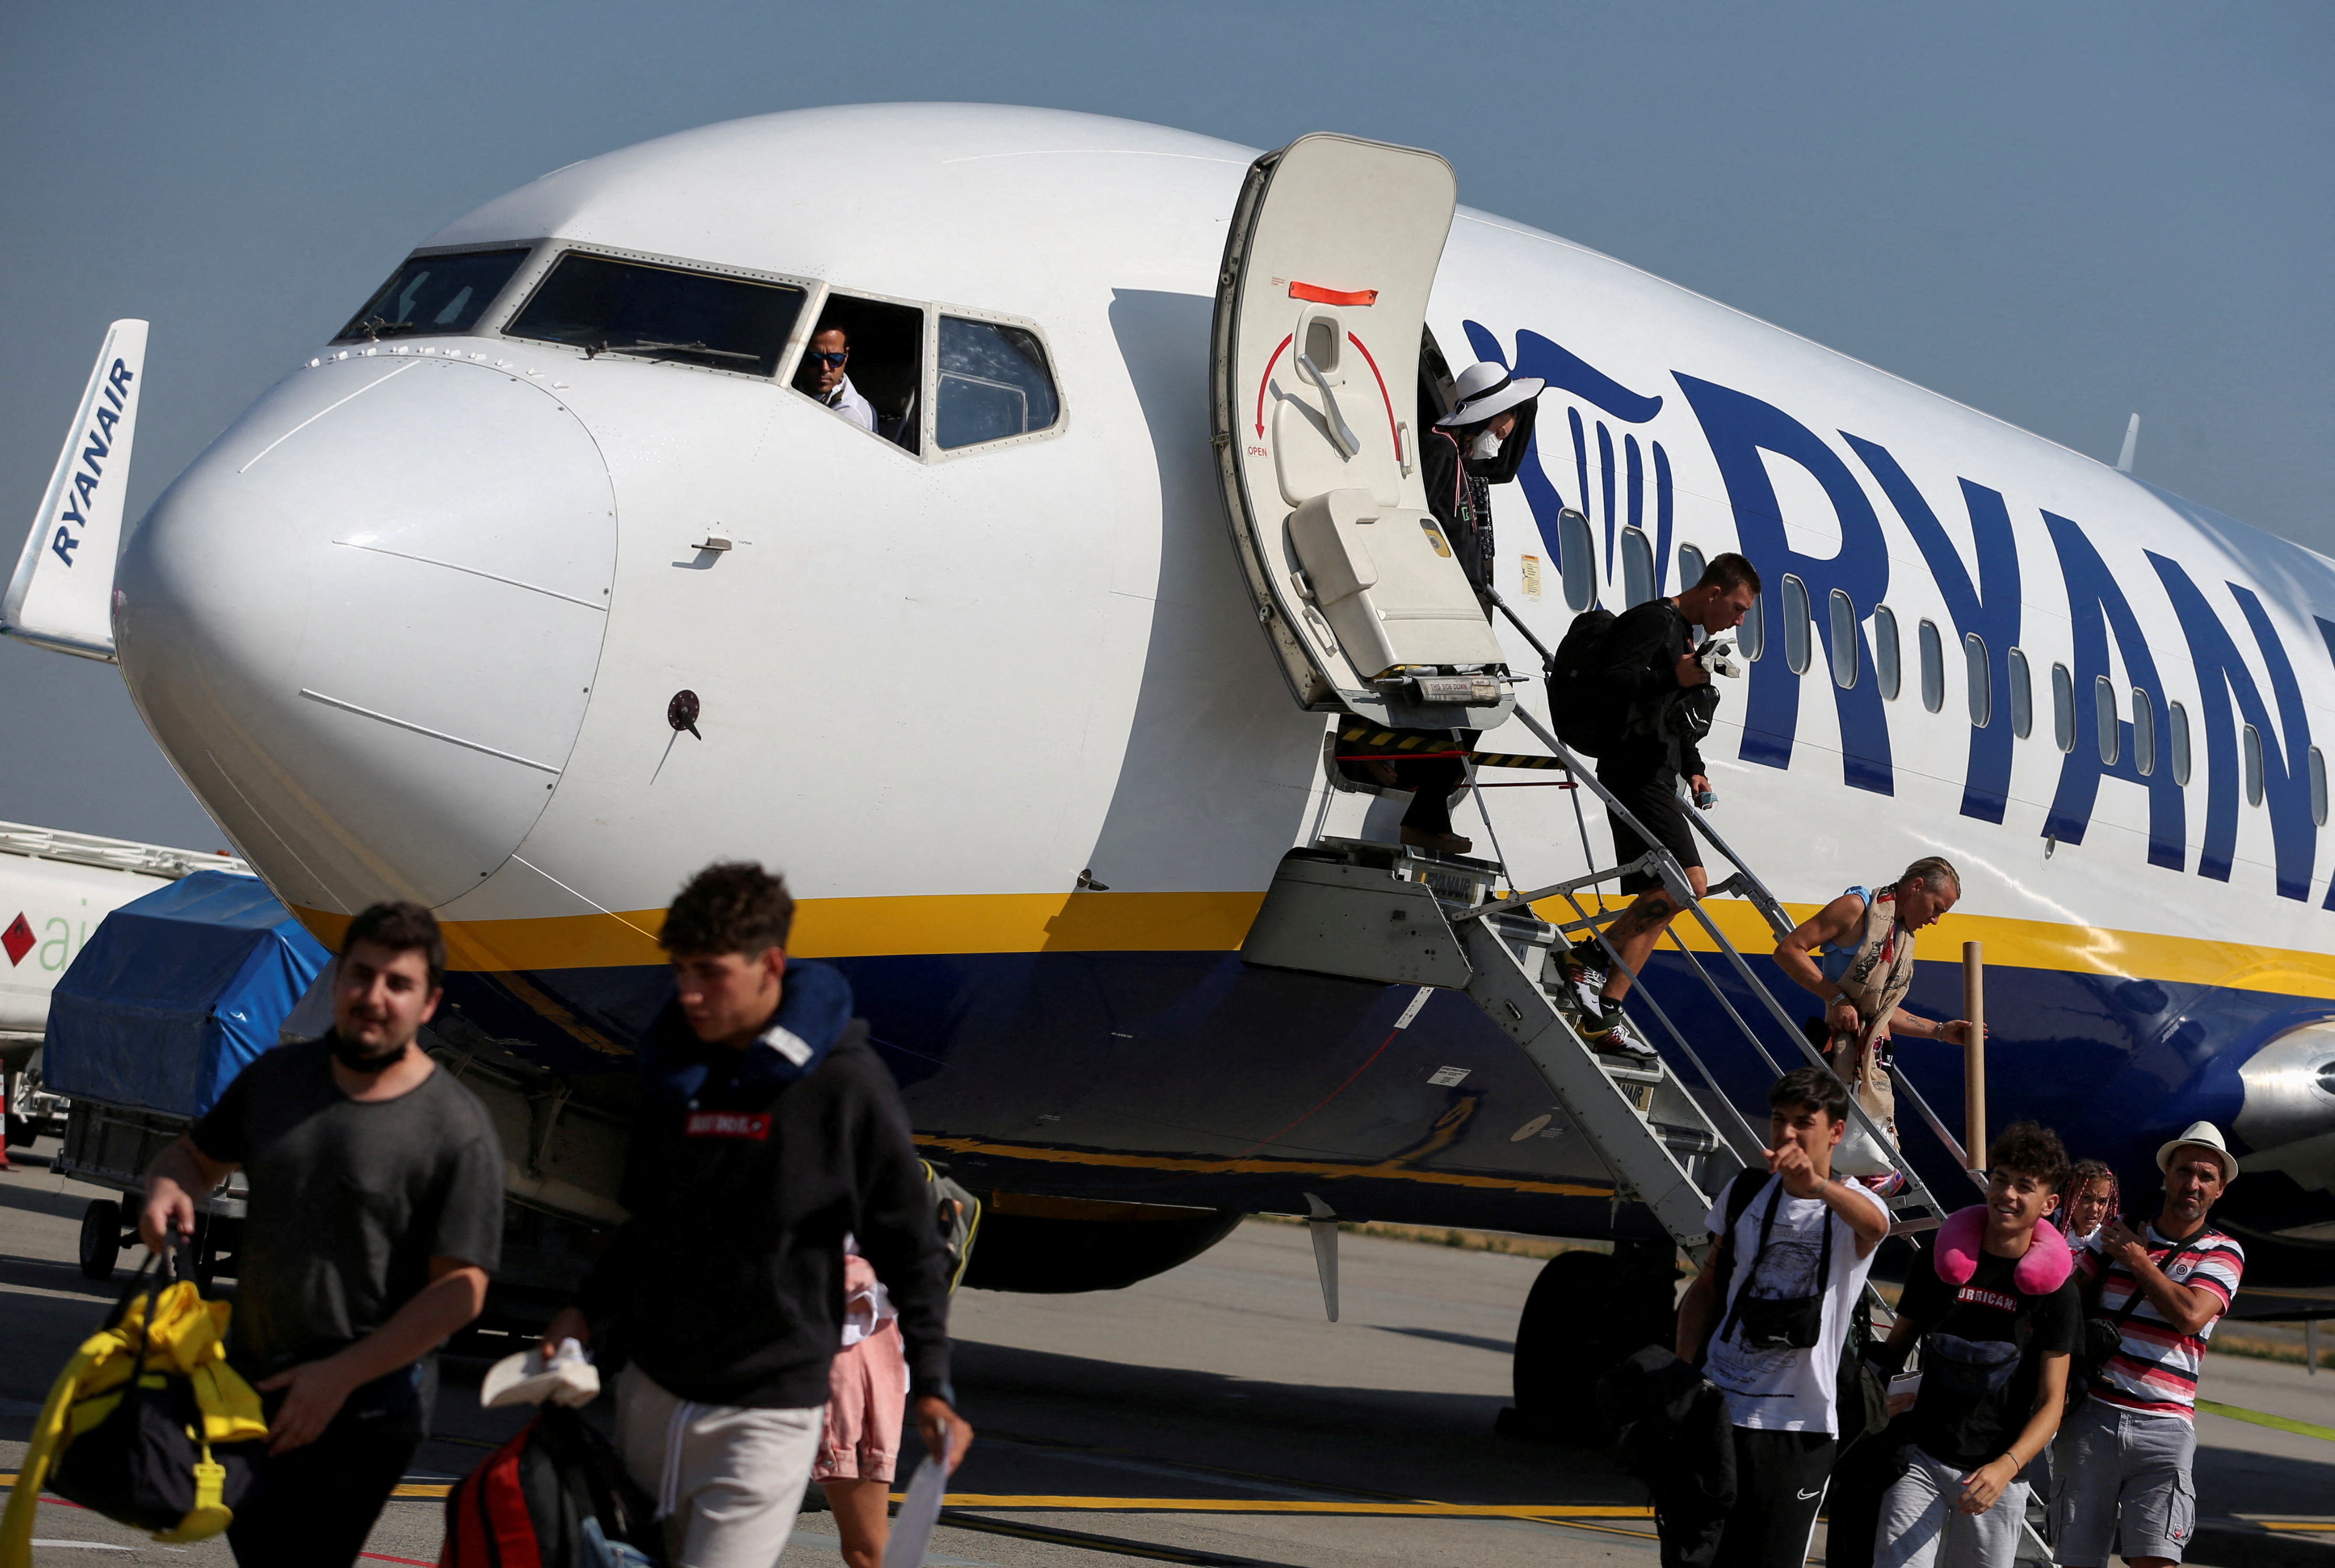 Passengers alight from a Ryanair aircraft at Ferenc Liszt International Airport in Budapest